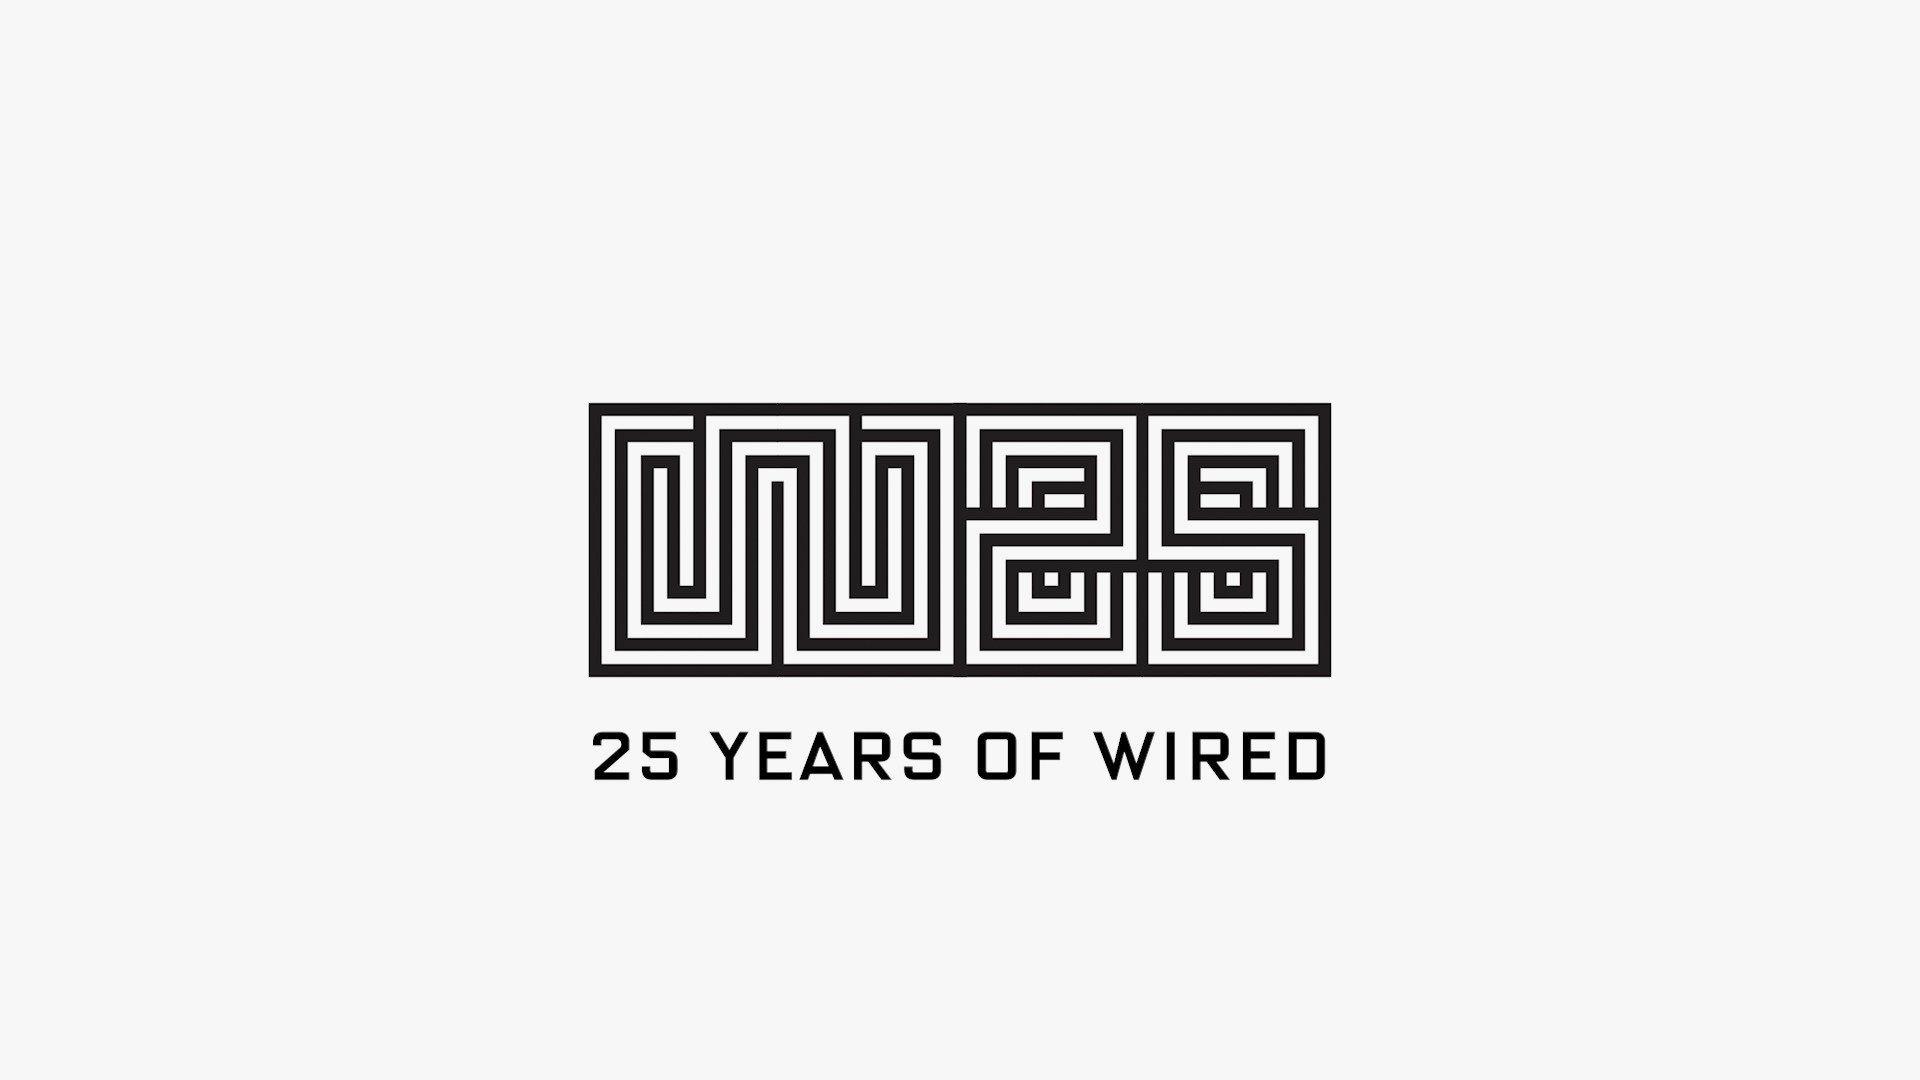 Wired.com Logo - WIRED25: How to Join WIRED's 25th Anniversary Celebration